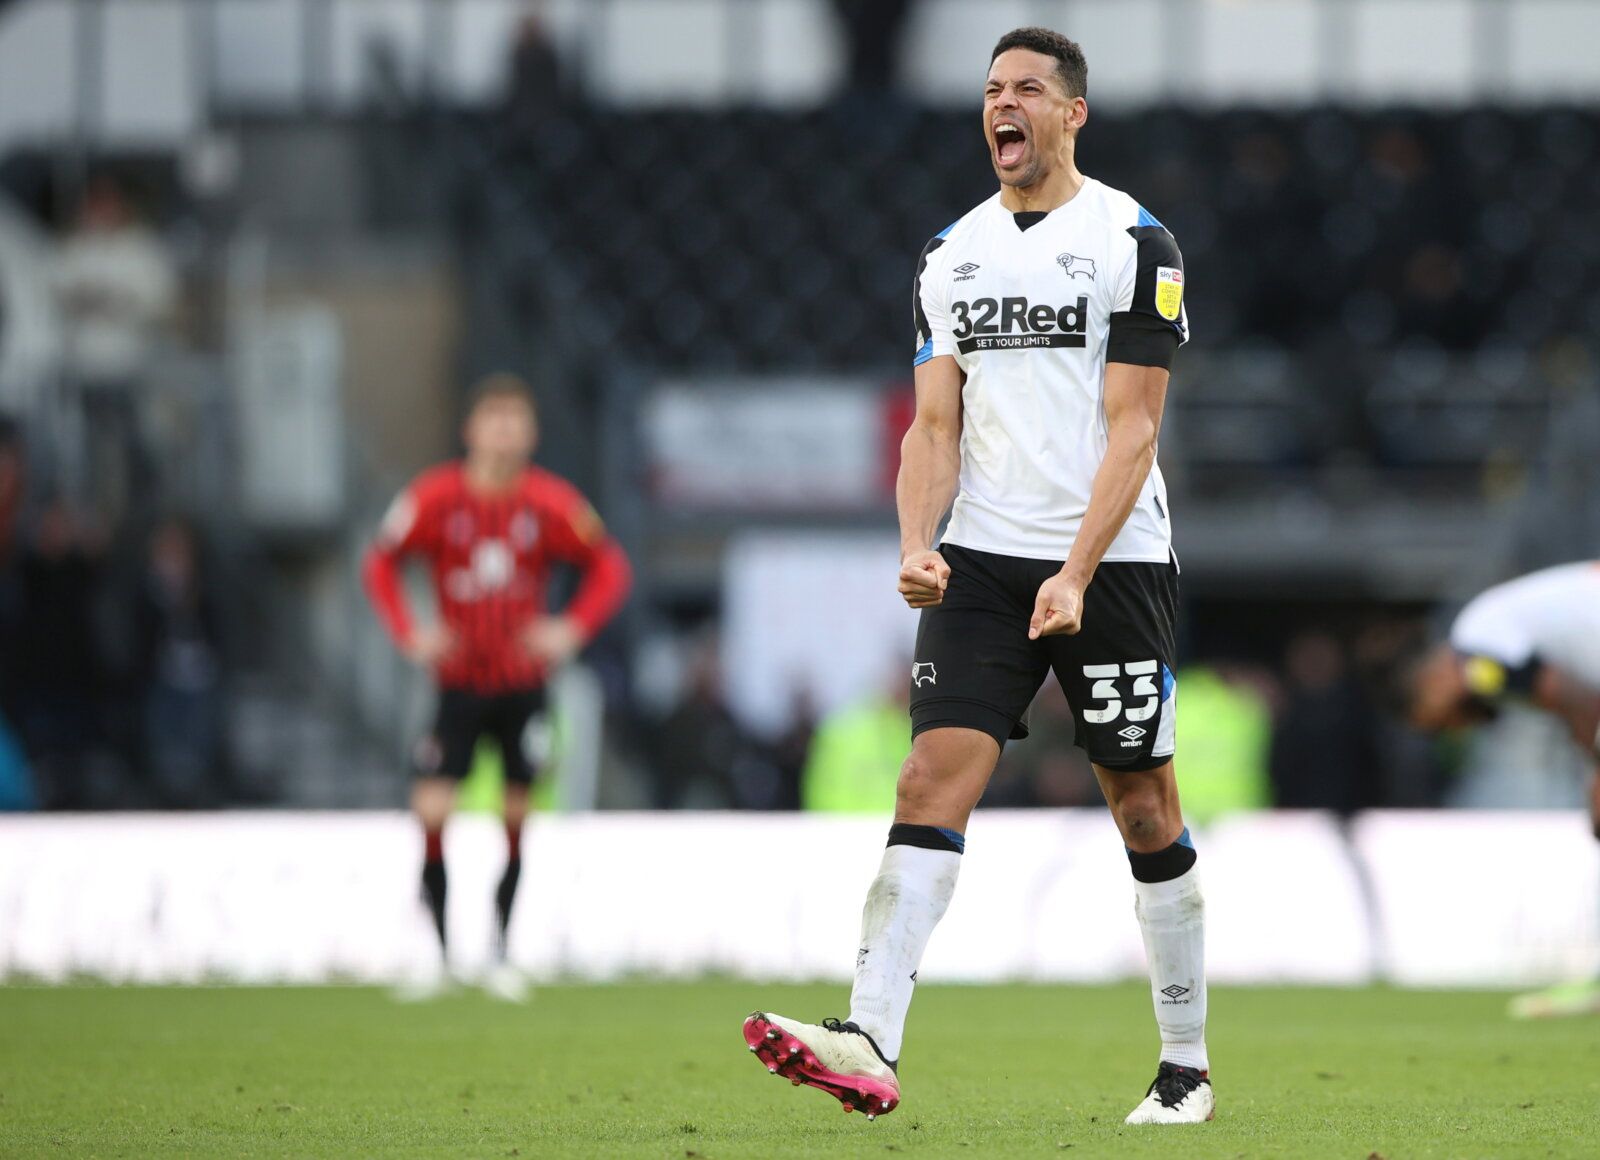 Soccer Football - Championship - Derby County v AFC Bournemouth - Pride Park, Derby, Britain - November 21, 2021 Derby County's Curtis Davies celebrates after the match  Molly Darlington/Action Images